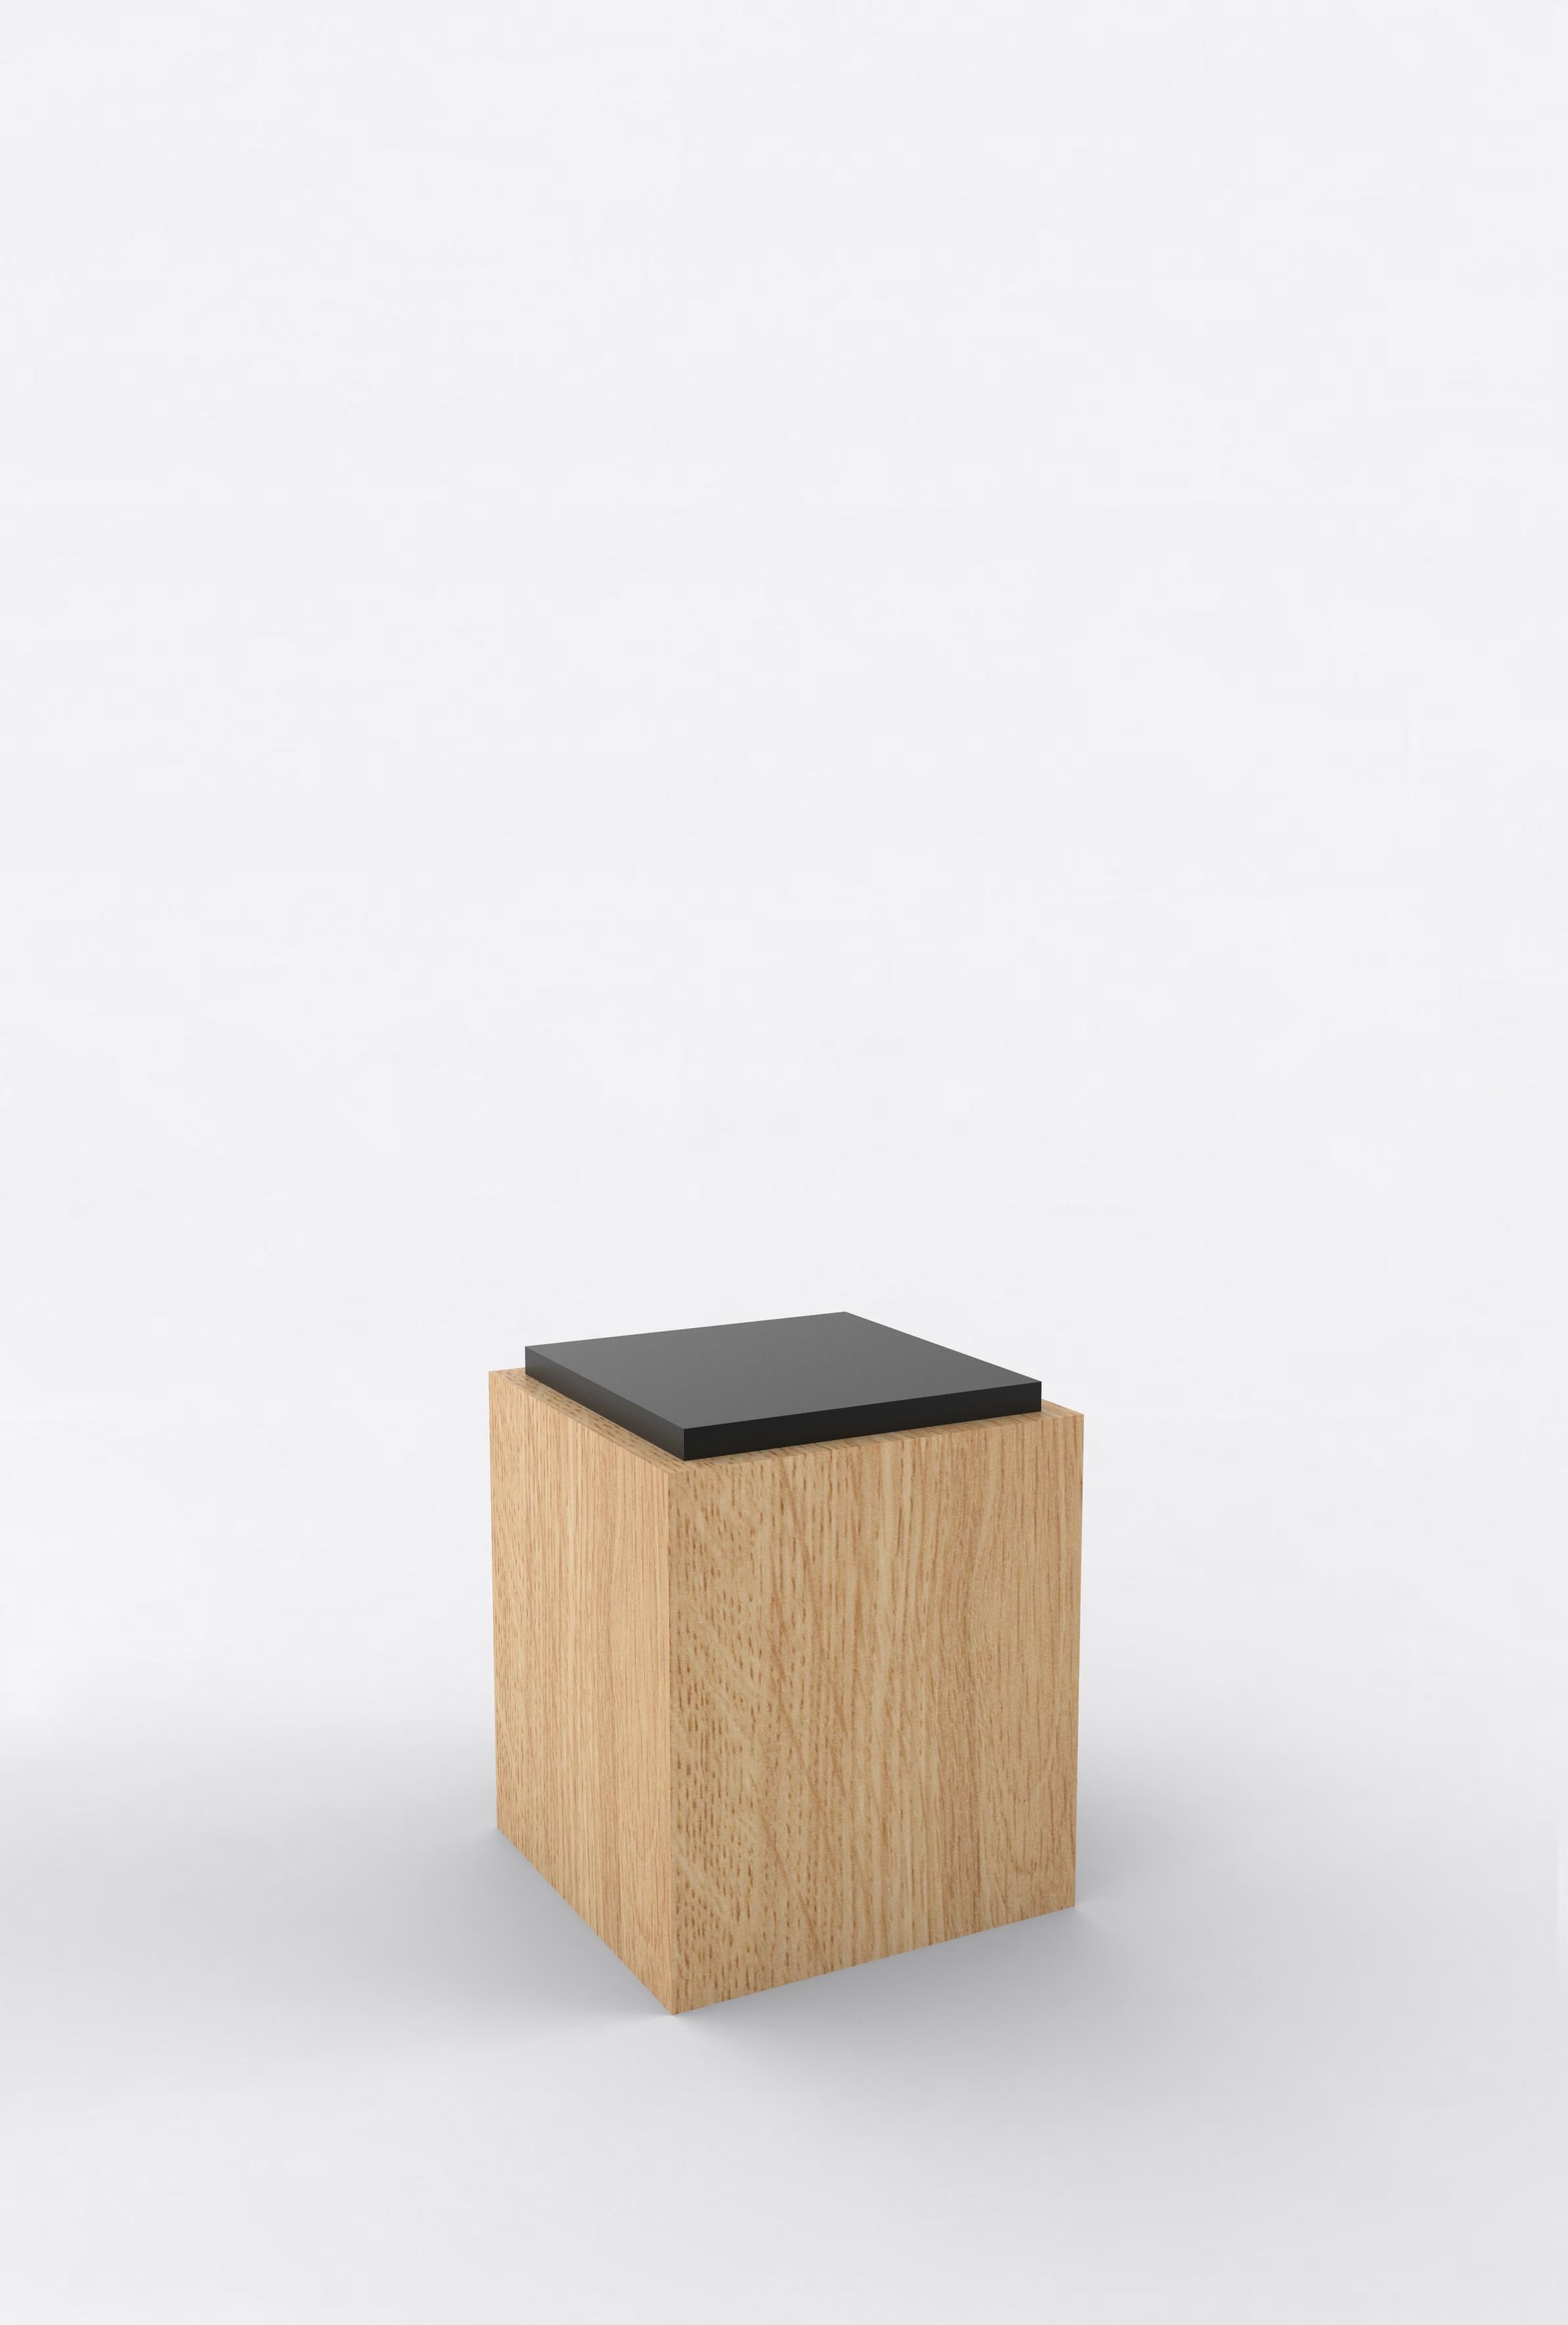 Post-Modern Contemporary 103 Side Table in Oak and Black by Orphan Work For Sale